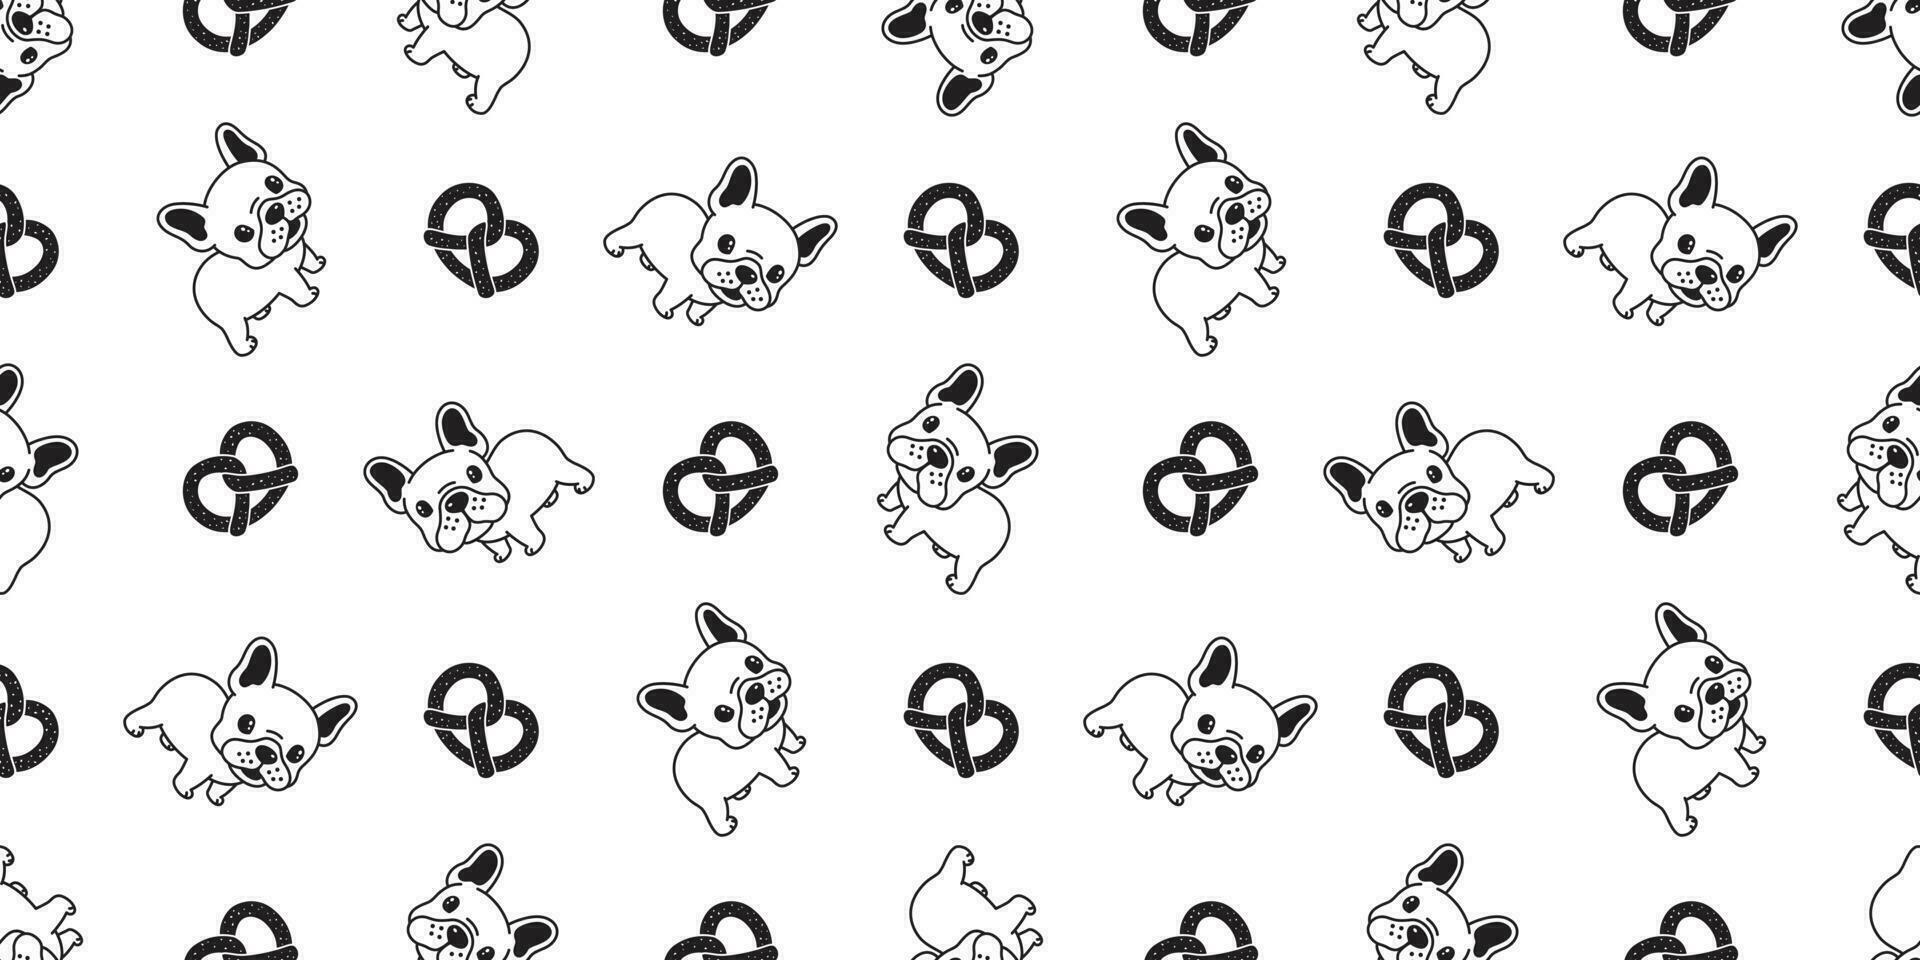 Dog seamless pattern vector french bulldog pretzel tile background scarf isolated repeat wallpaper illustration cartoon dog breed